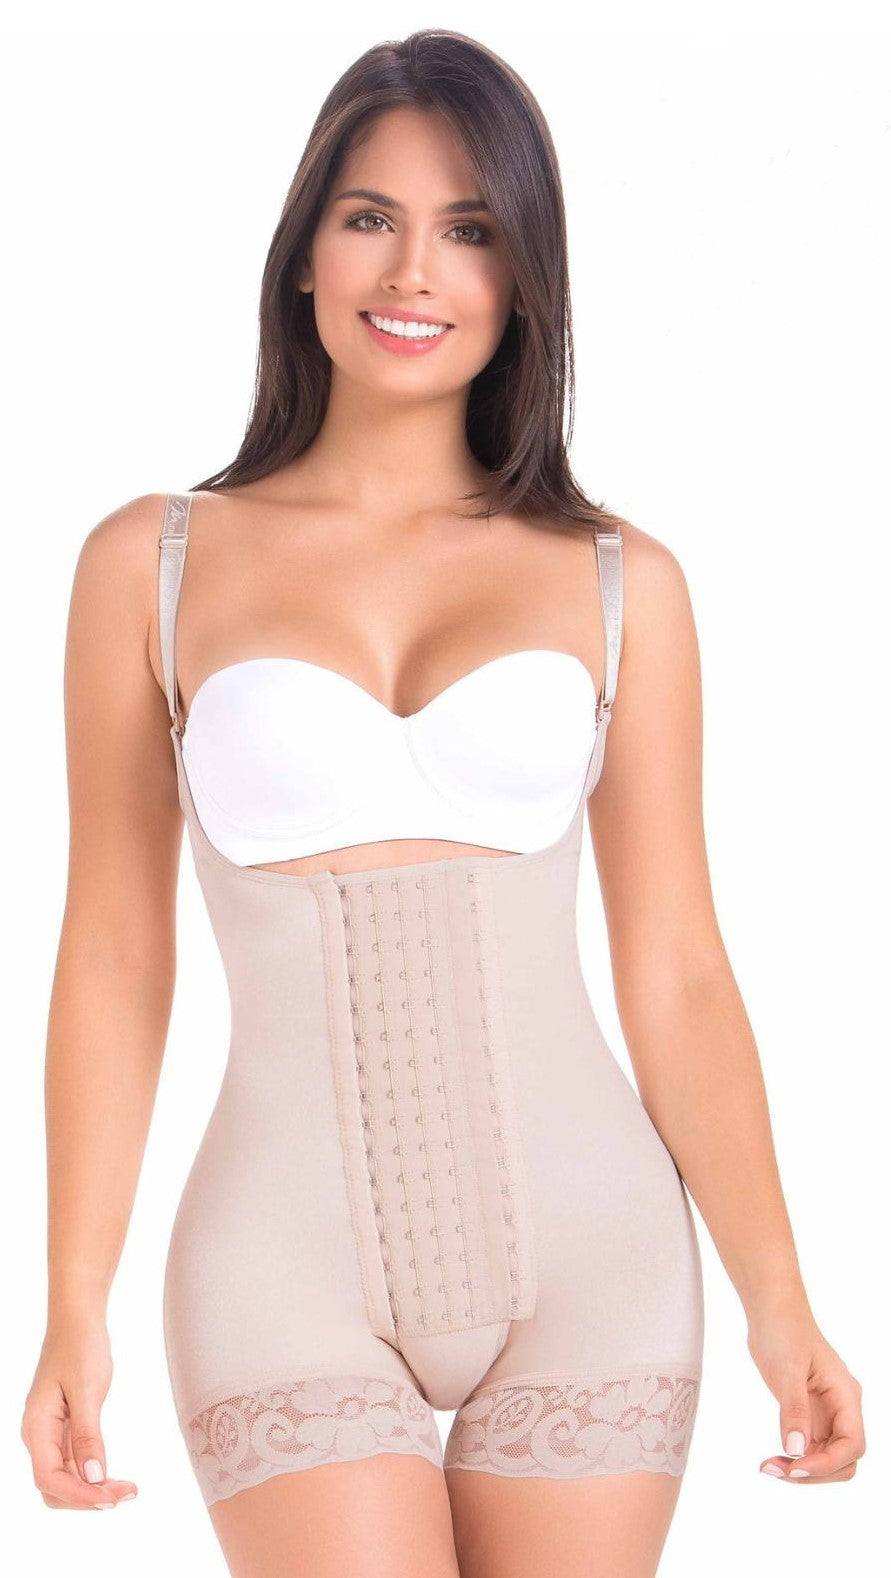 MARIA GIRDLE AND DAILY USE POST SURGICAL POST BIRTH REDUCES UP TO 4 SIZES